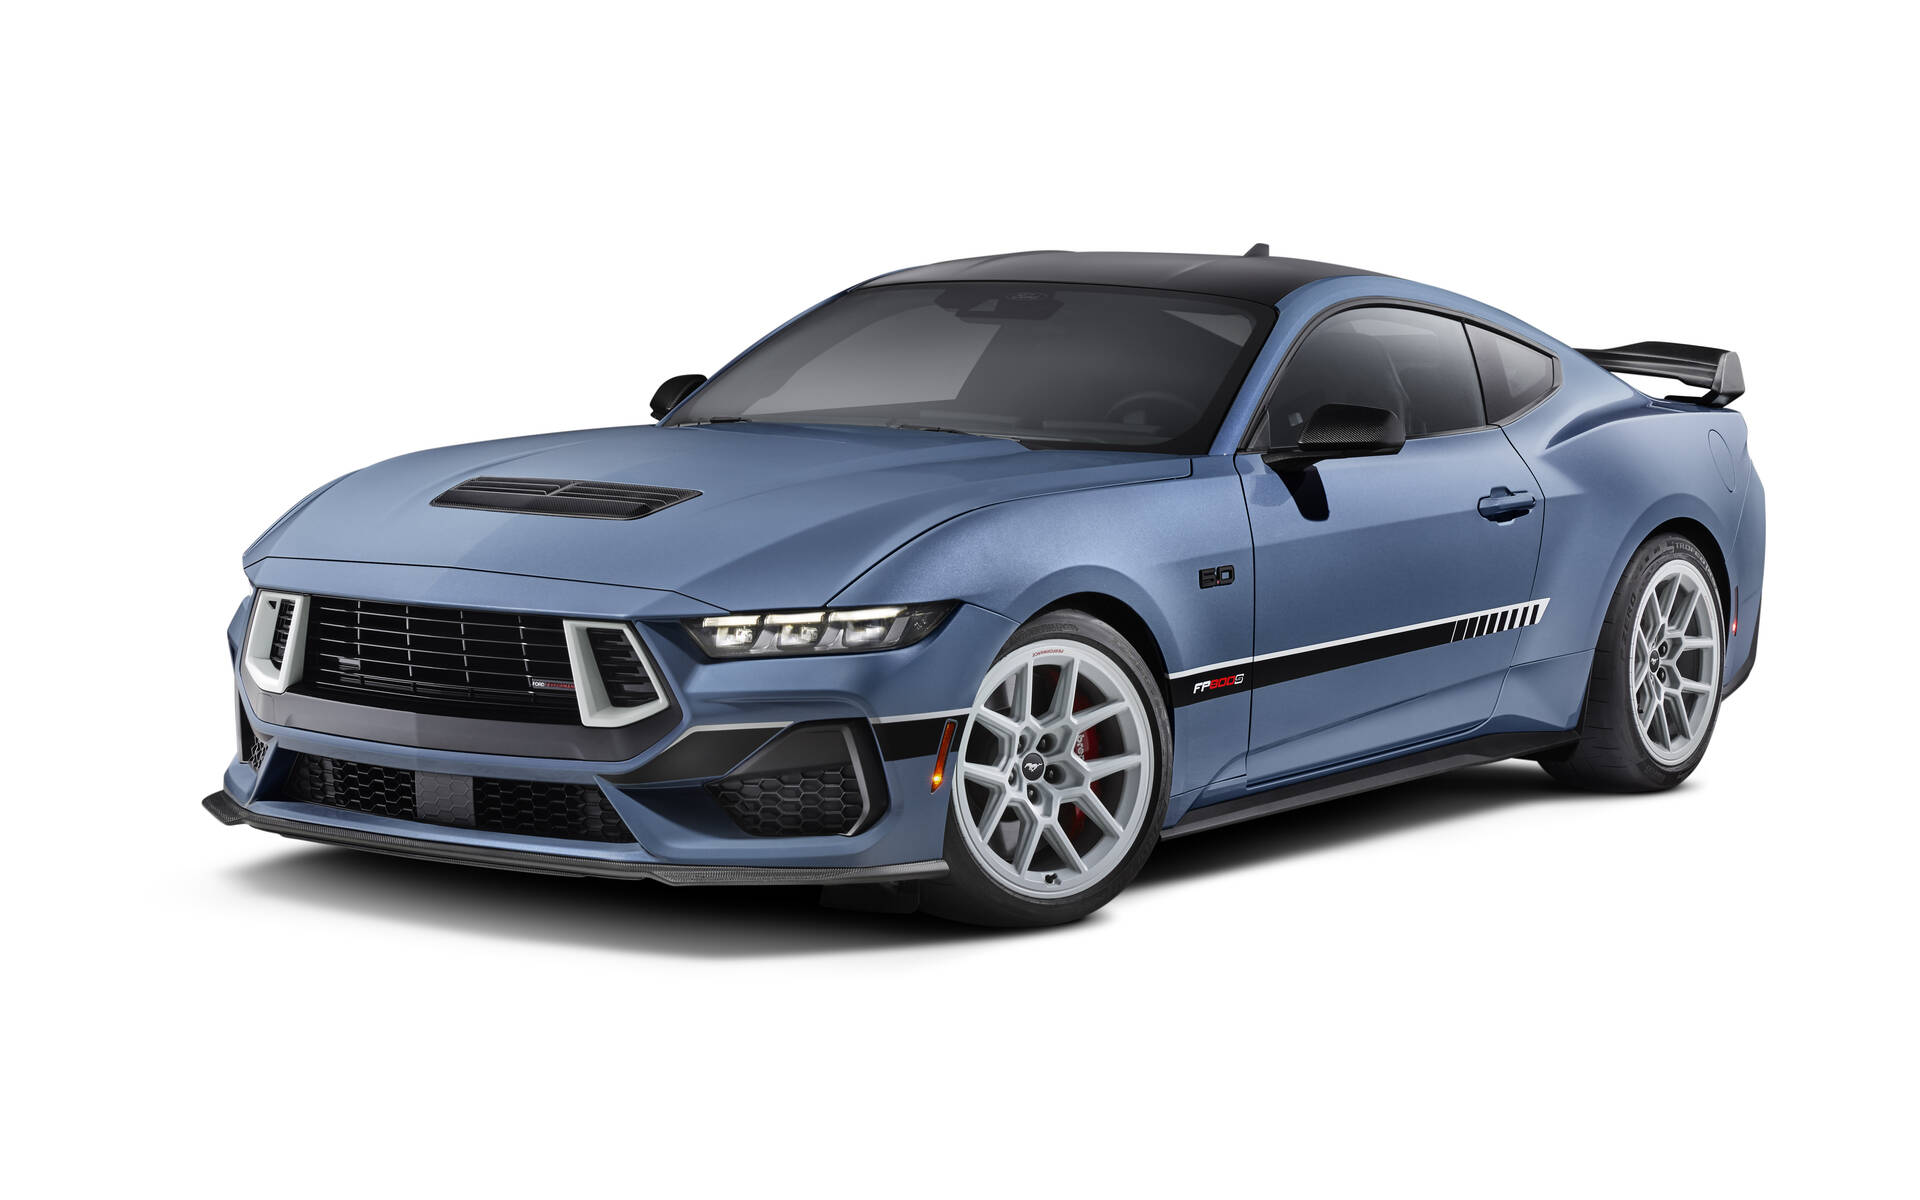 New Supercharger Kit Cranks Ford Mustang GT Up to 800+ Horsepower